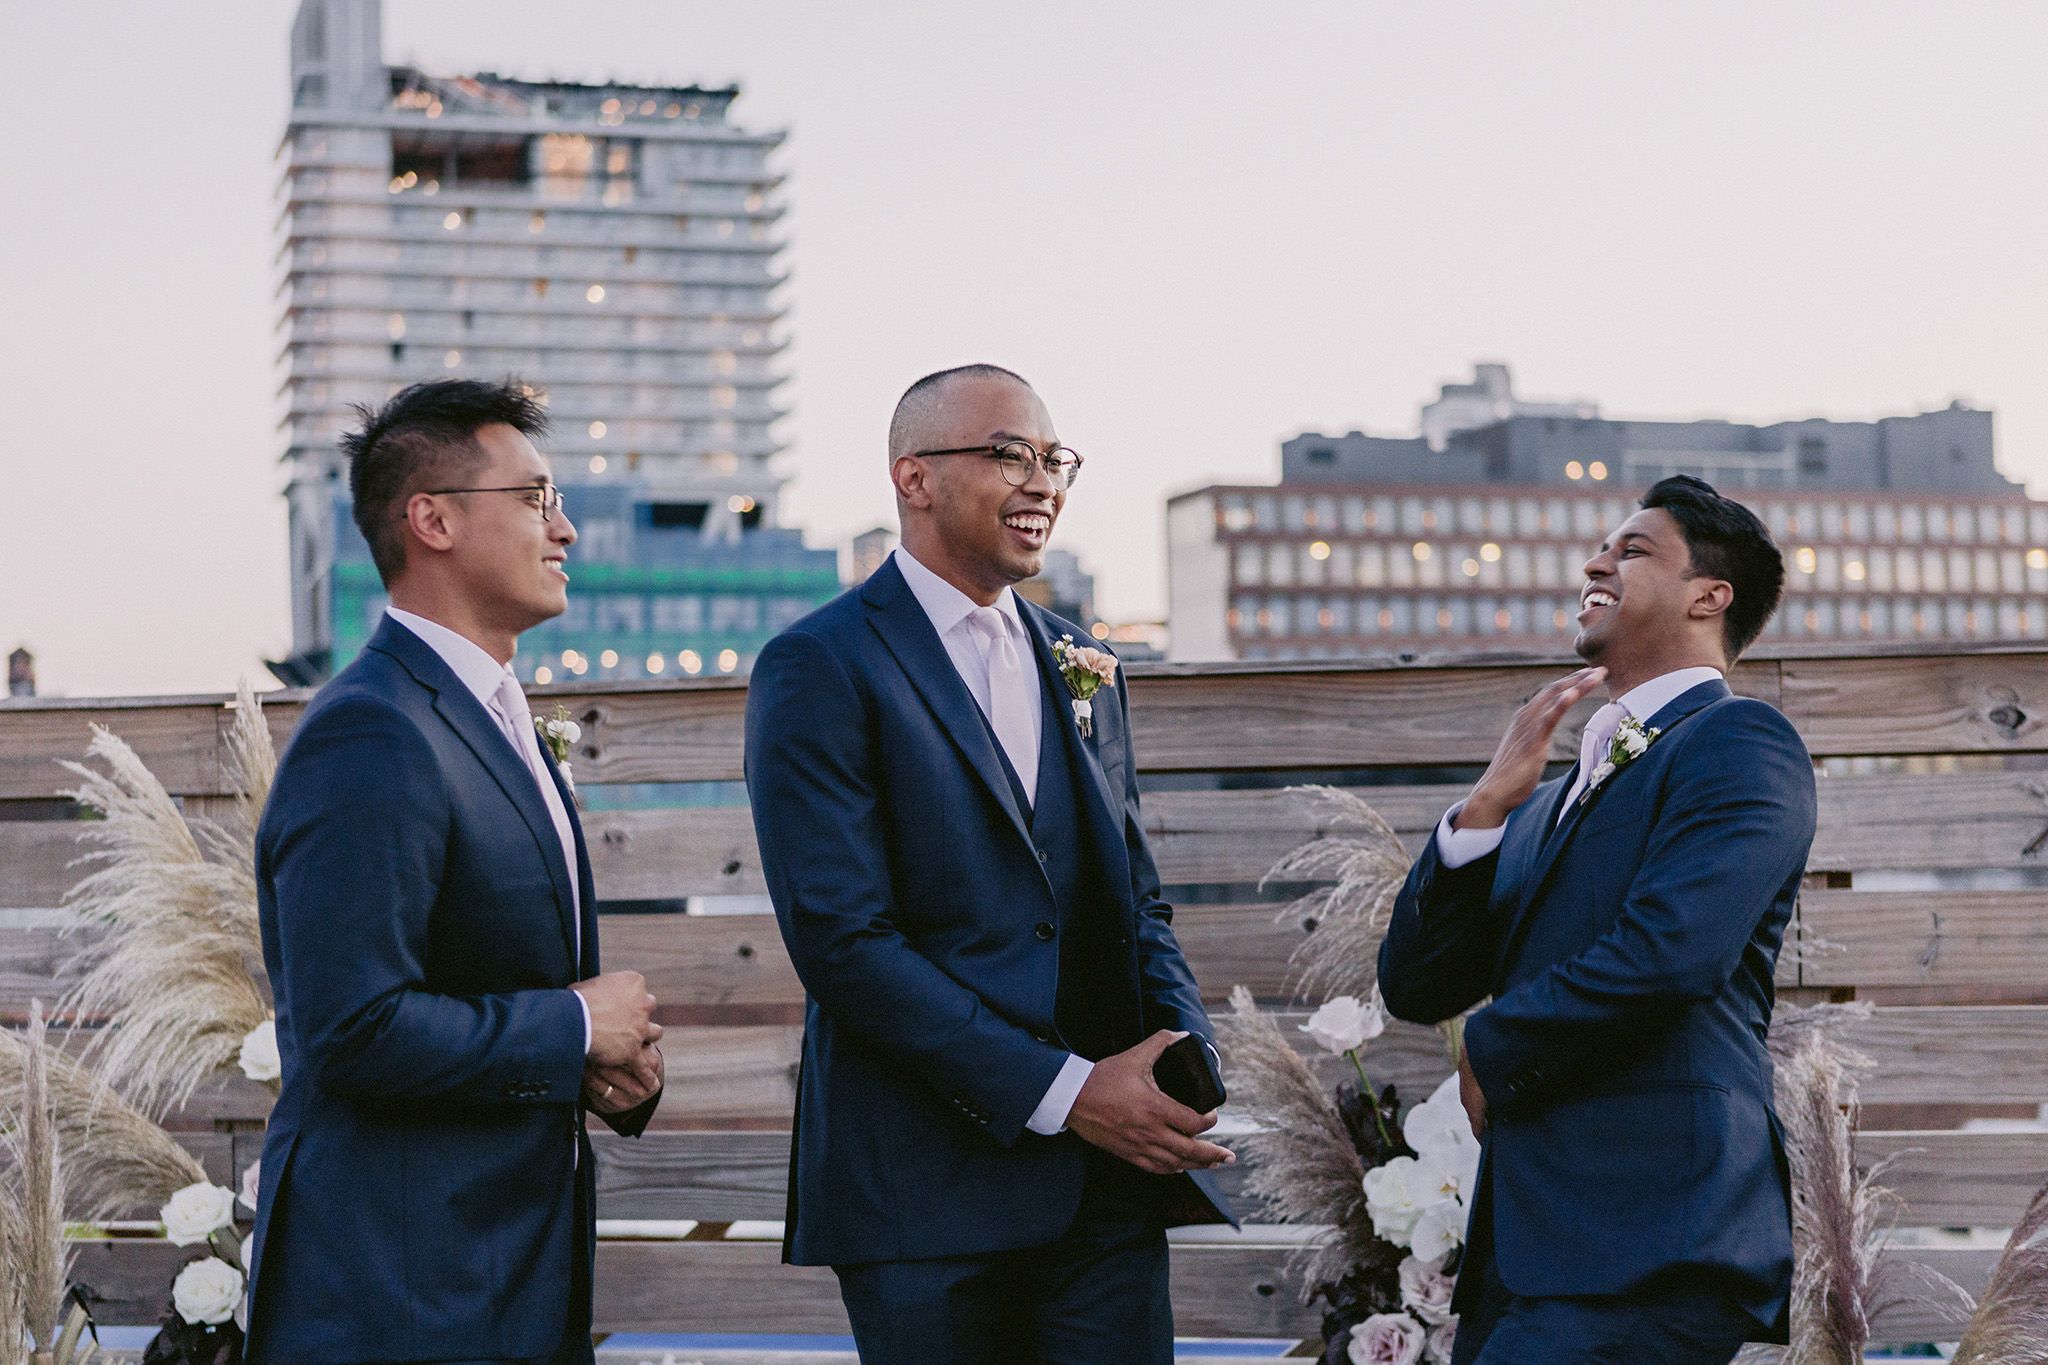 The groom is chatting happily with his groomsmen in New York City.